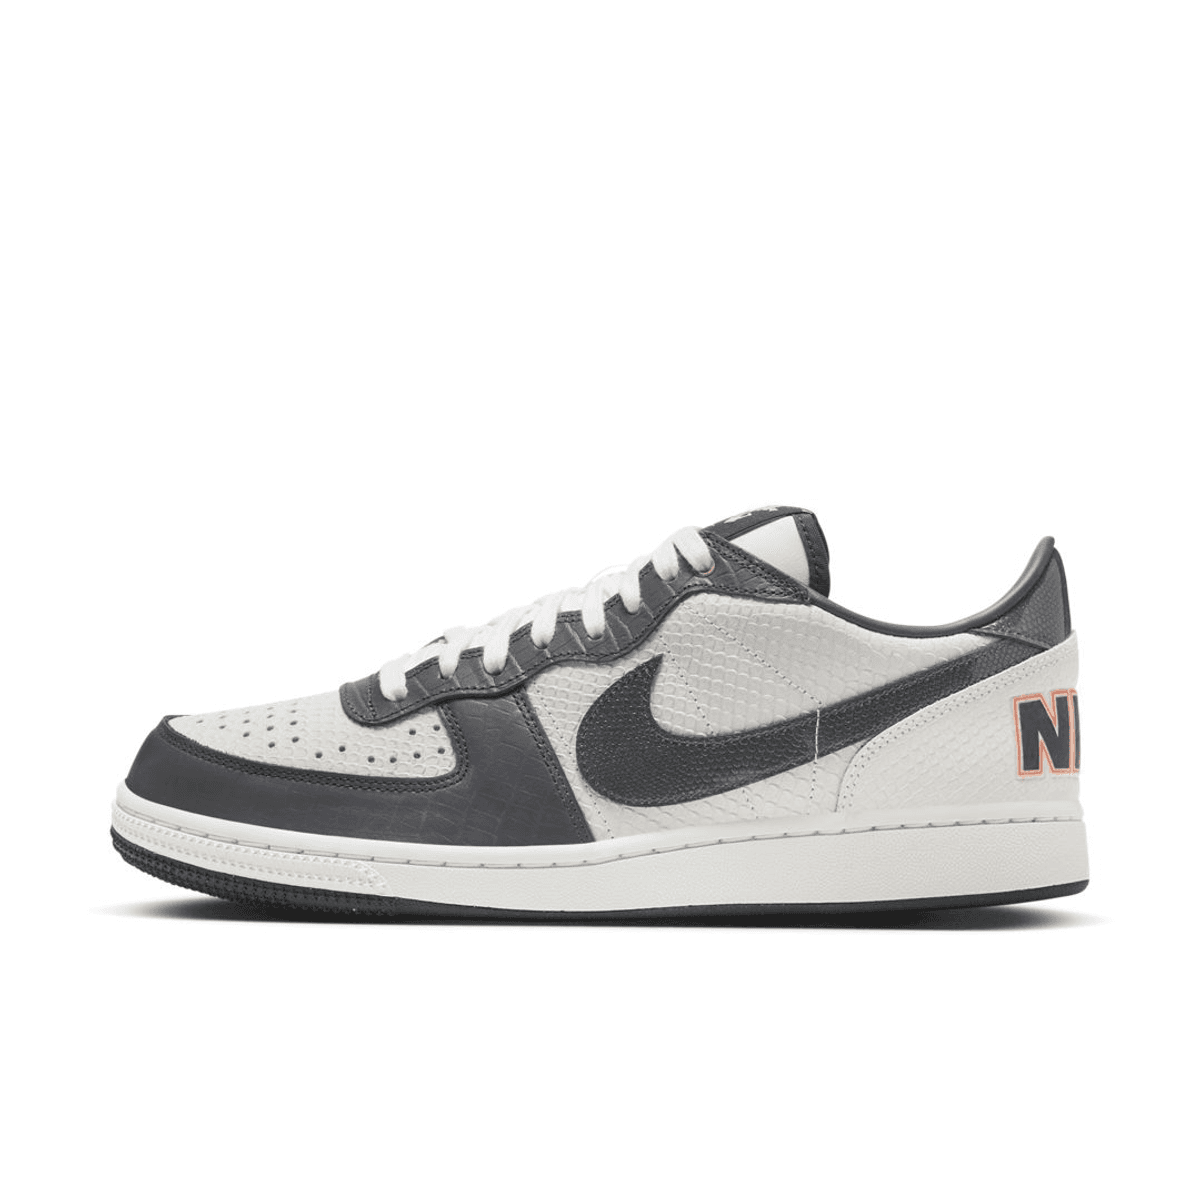 Official Images of The New Nike Terminator Low